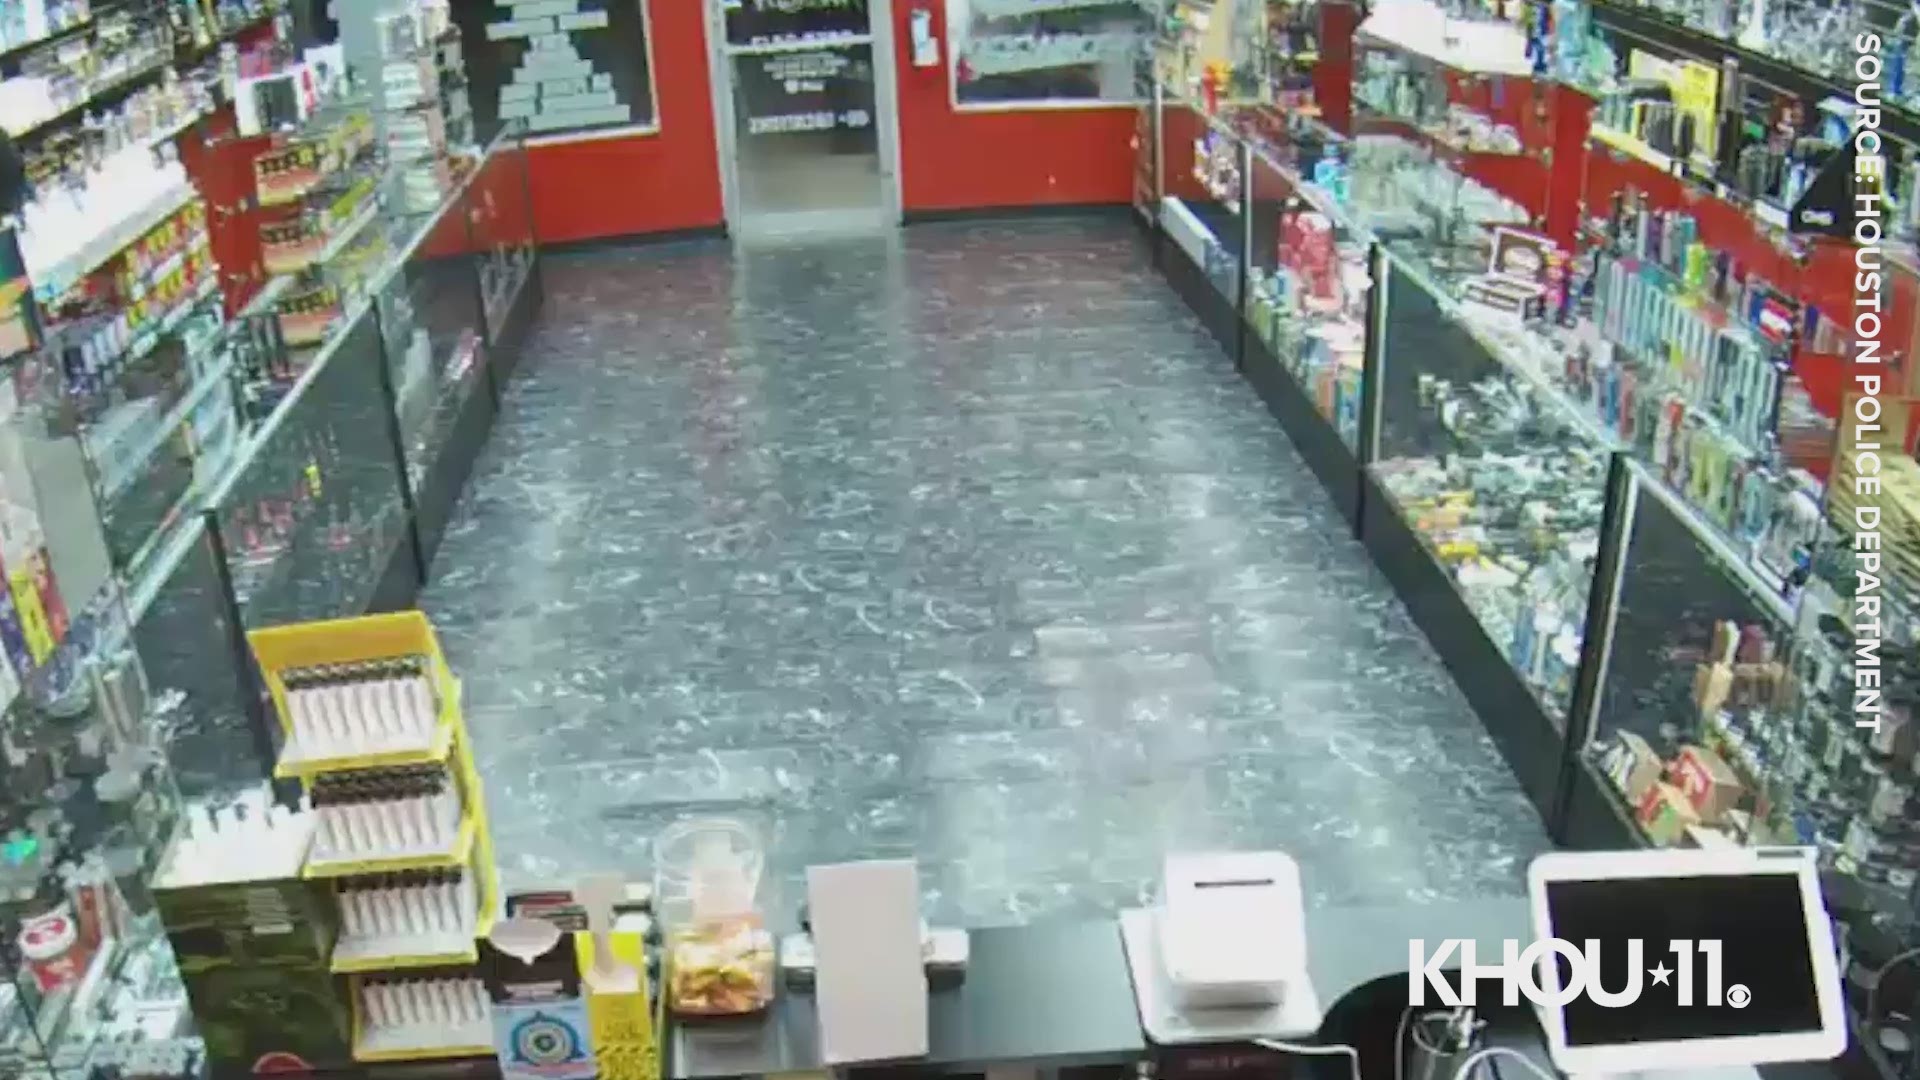 Houston police released surveillance video Tuesday of two suspects accused of robbing a vape shop near the Northwest Freeway at gunpoint.